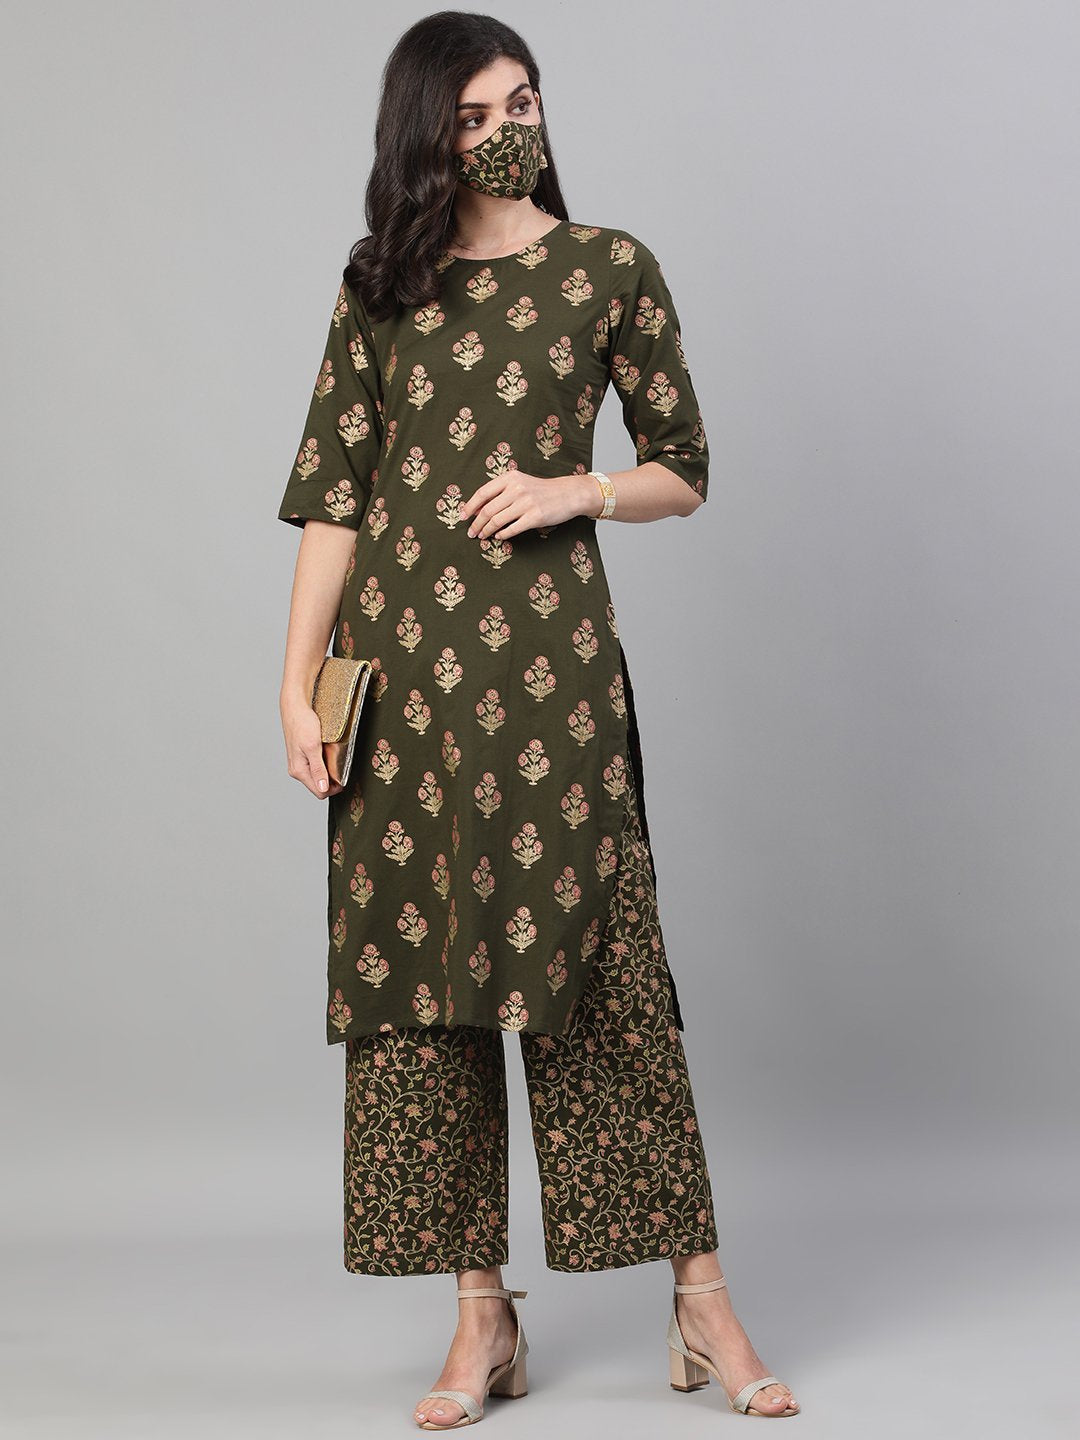 Women's Mehendi Green And Pink Gold Printed Three-Quarter Sleeves Straight Kurta With Palazzo With Pockets And Face Mask - Nayo Clothing